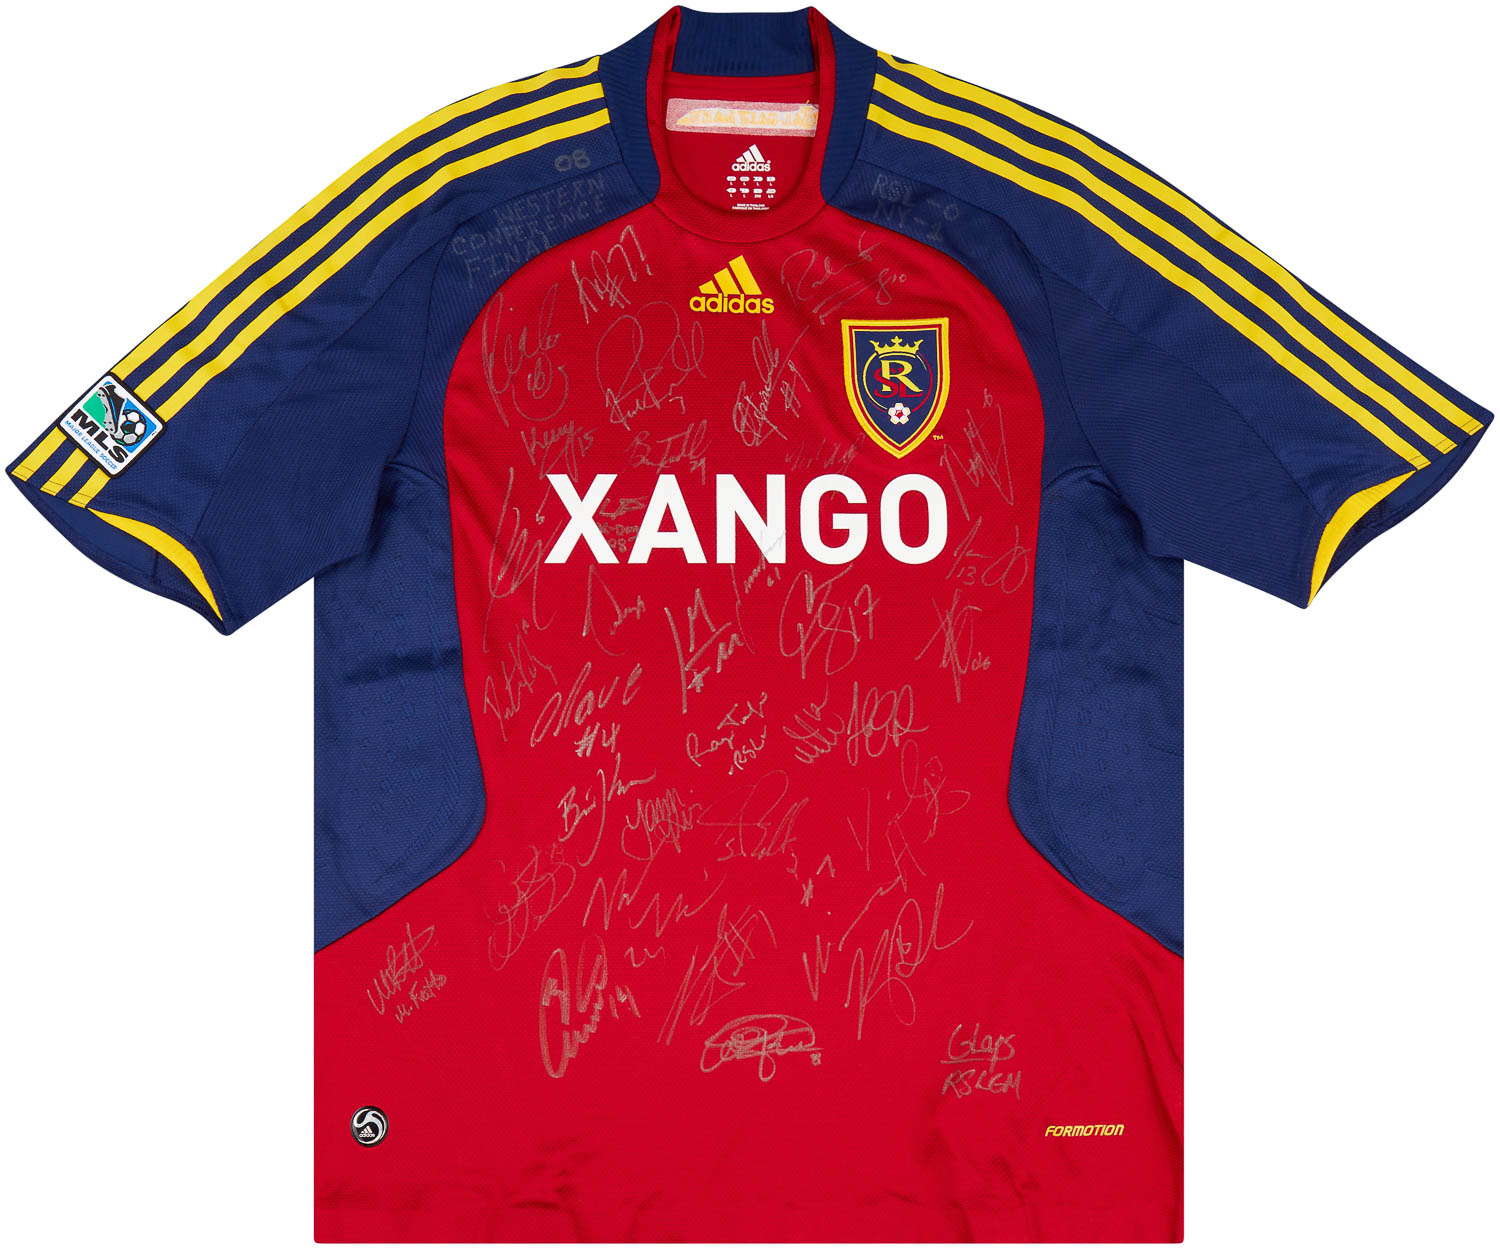 2008 Real Salt Lake Player Issue Signed Home Shirt - 8/10 - ()